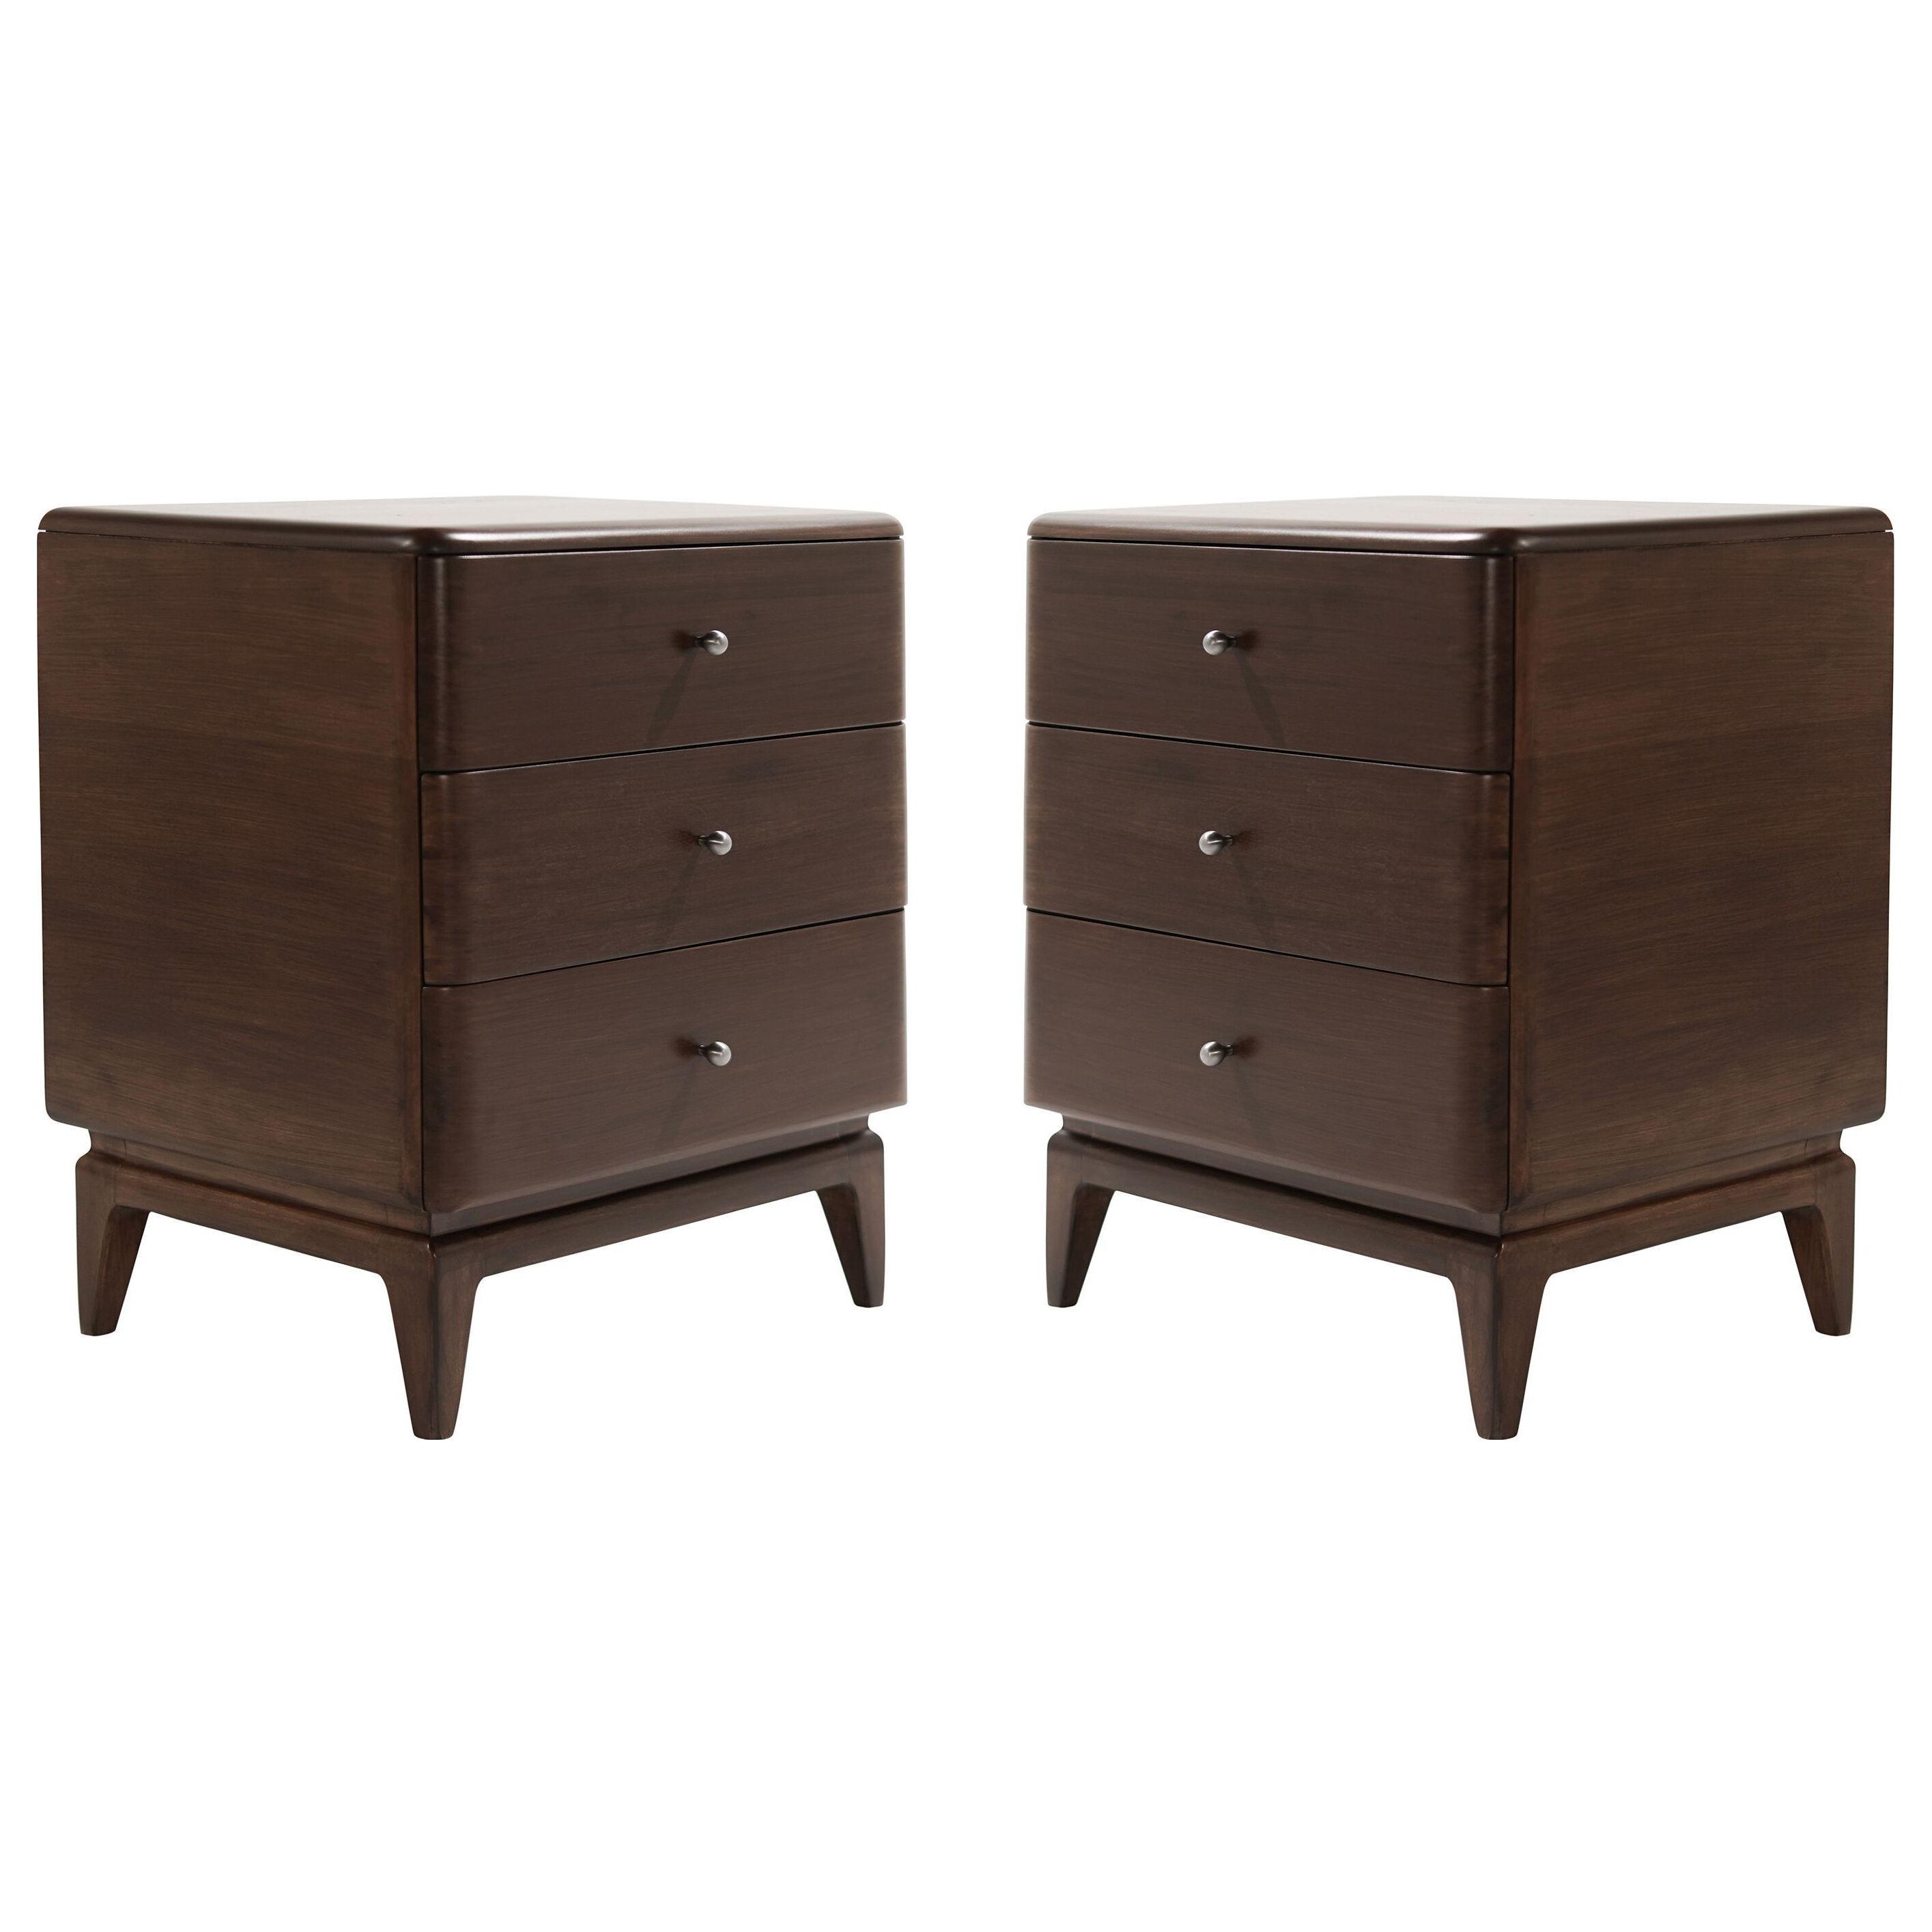 Set of Bedside Tables by Heywood Wakefield, 1950s